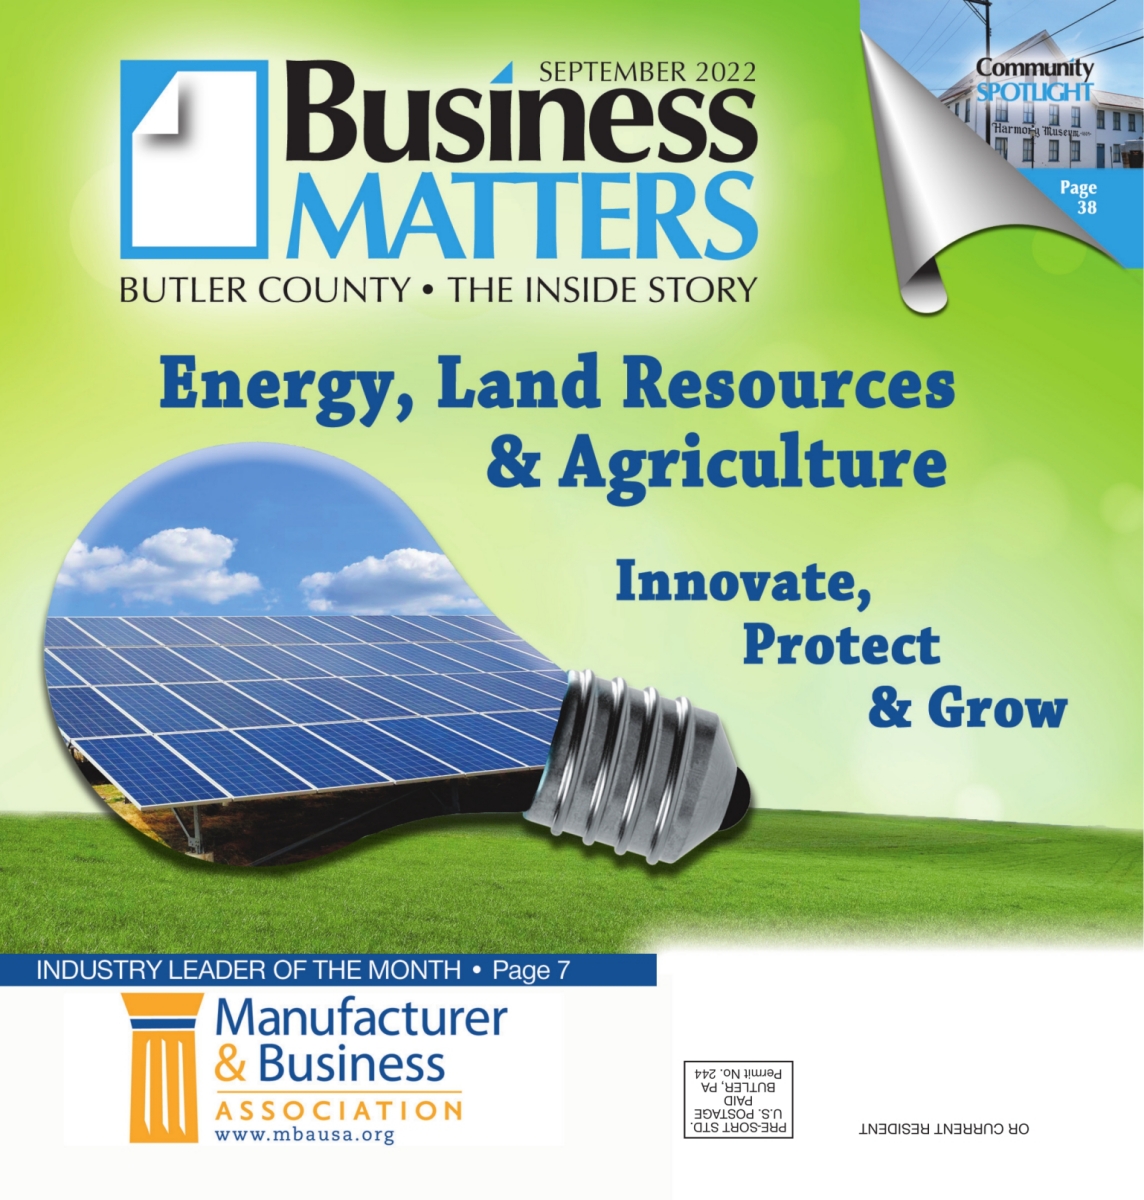 September 2022 - Energy, Land Resources & Agriculture - Innovate, Protect & Grow